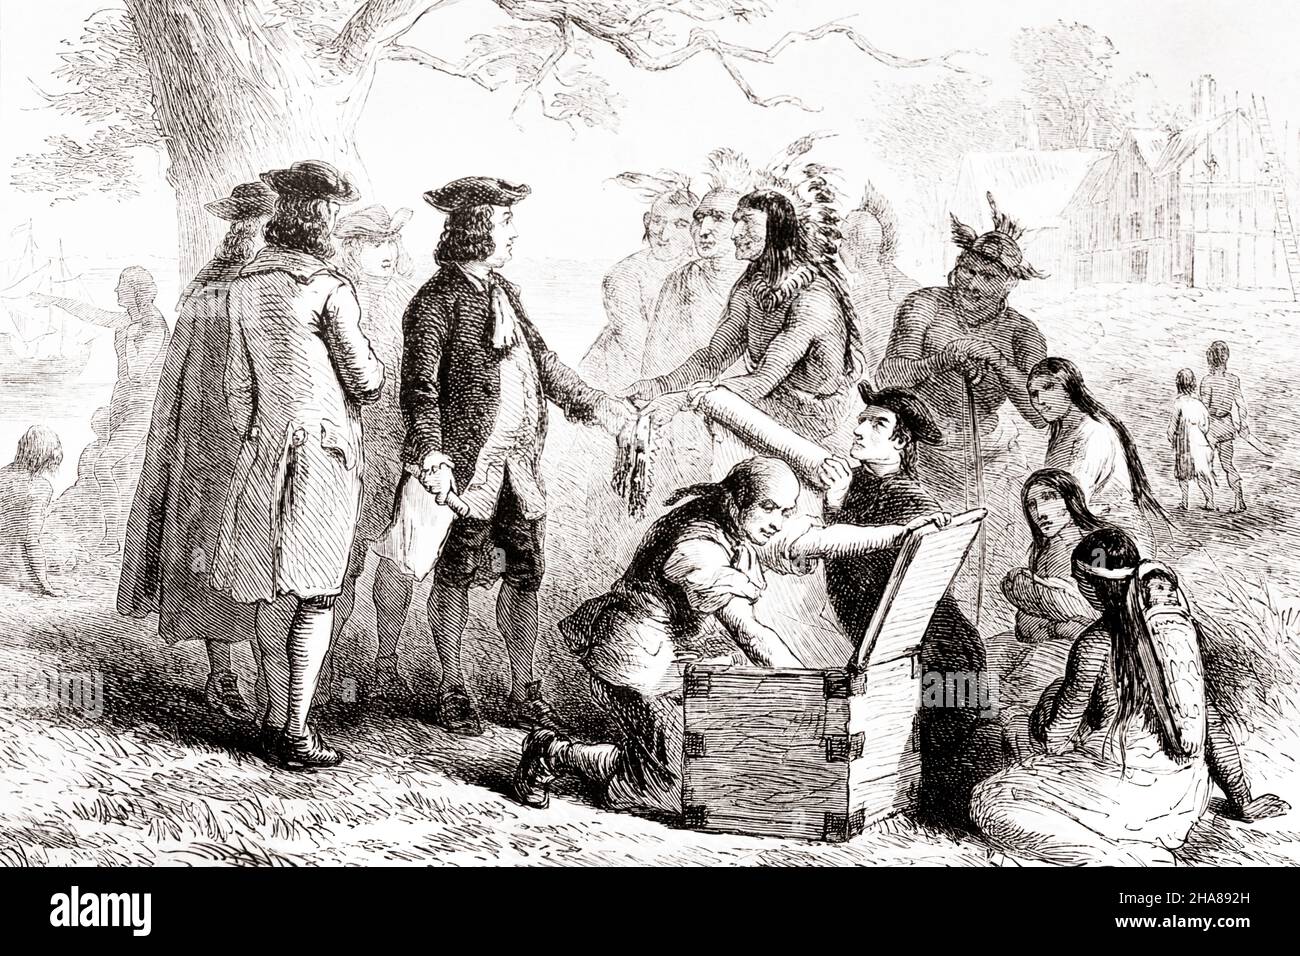 1600s 1682 WILLIAM PENN UNDER TREATY ELM TRADING WITH TAMANEND CHIEF OF TURTLE CLAN OF DELAWARE VALLEY LENNI-LENAPE INDIANS  - i5990 LAN001 HARS COPY SPACE FRIENDSHIP FULL-LENGTH LADIES PERSONS INDIANS MALES RISK MIDDLE-AGED B&W NORTH AMERICA MIDDLE-AGED MAN NORTH AMERICAN WIDE ANGLE TEMPTATION MIDDLE-AGED WOMAN AGREE AGREEMENT CHOICE LEADERSHIP PROGRESS COLONY PENN NATION OPPORTUNITY AUTHORITY OCCUPATIONS POLITICS SHAKING HANDS TRADING CONCEPTUAL TRIBE COLONISTS NATIVE AMERICAN QUAKER TAMMANY 1600s 1682 DELAWARE VALLEY MID-ADULT MID-ADULT MAN MID-ADULT WOMAN NATIVE AMERICANS 1683 Stock Photo